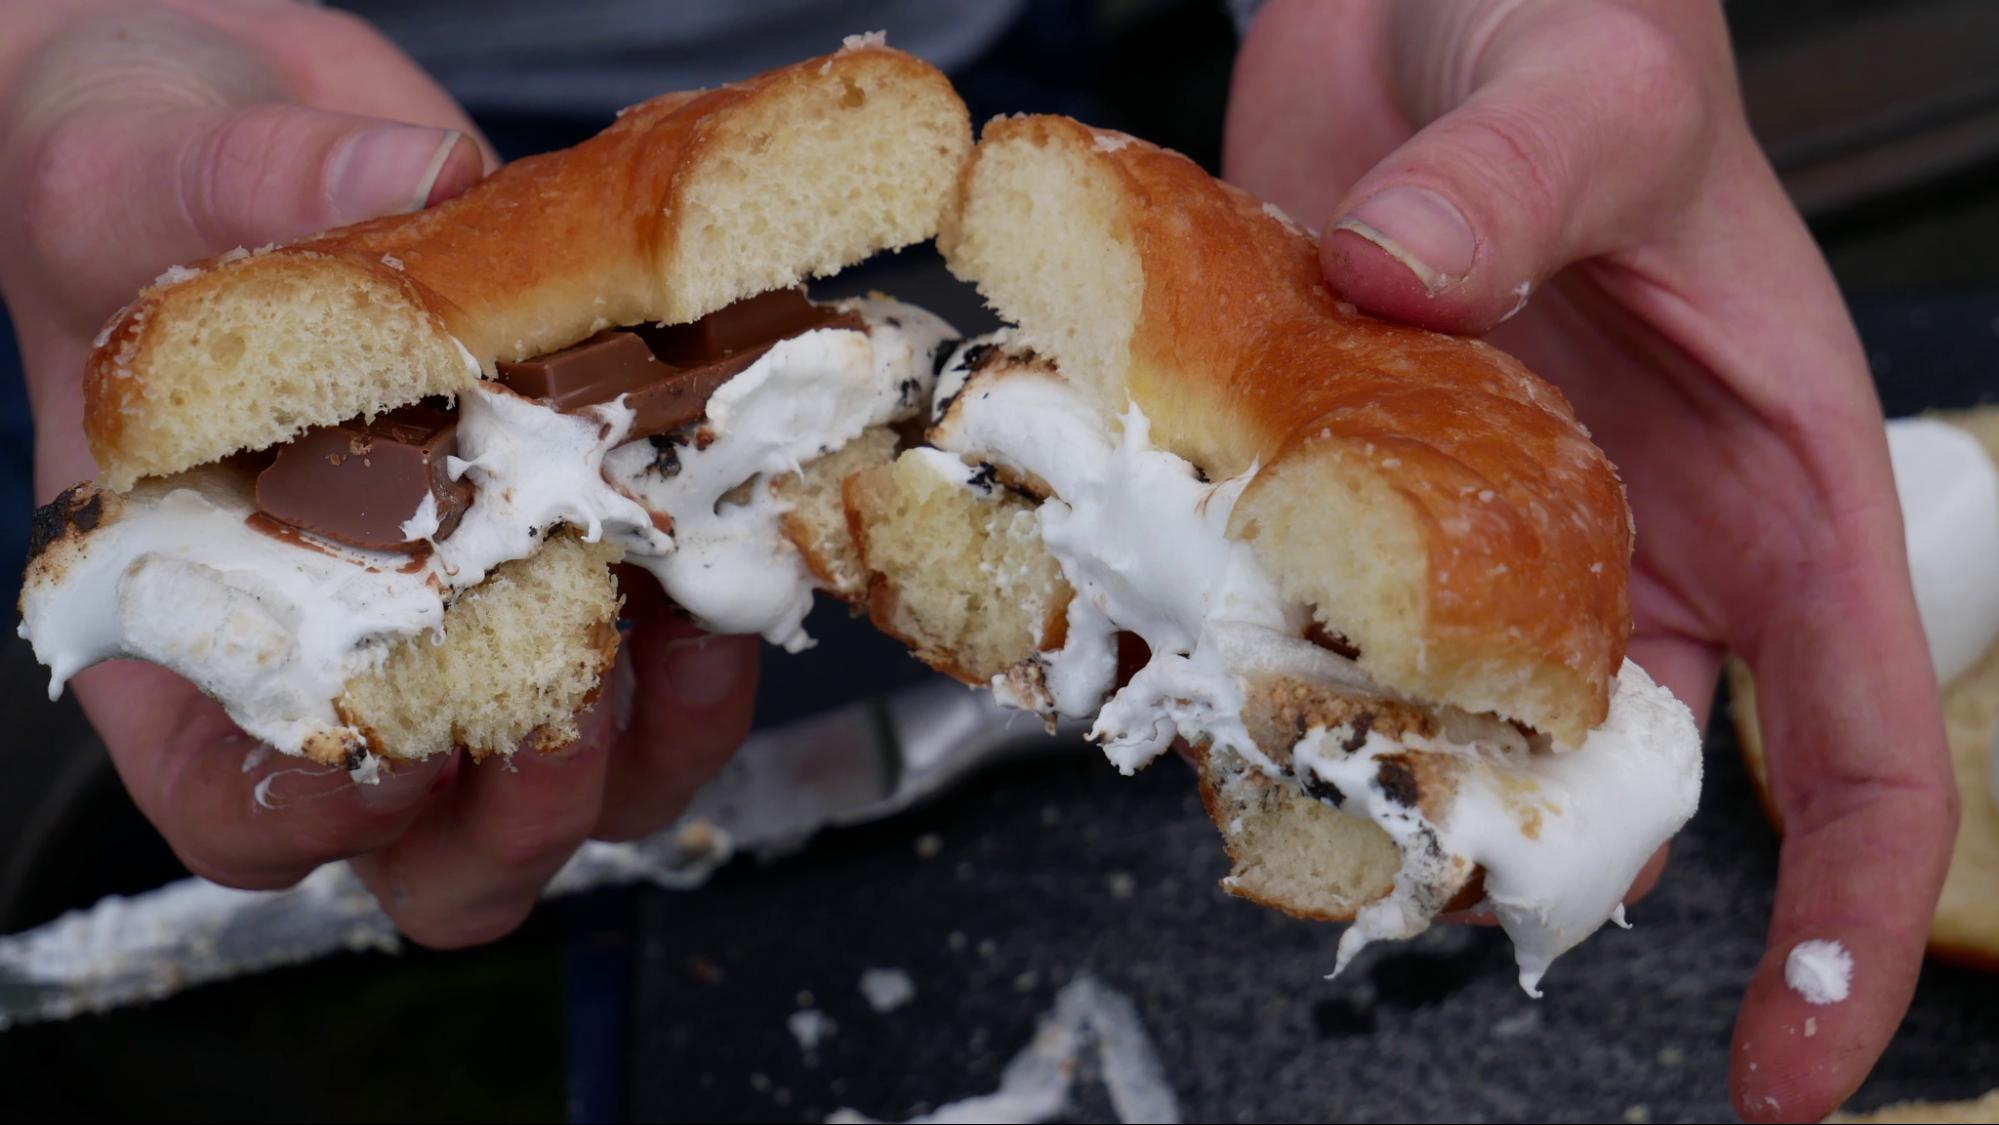 A s'more made with a glazed donut from The Rolling Pin Bakery in Hope, BC